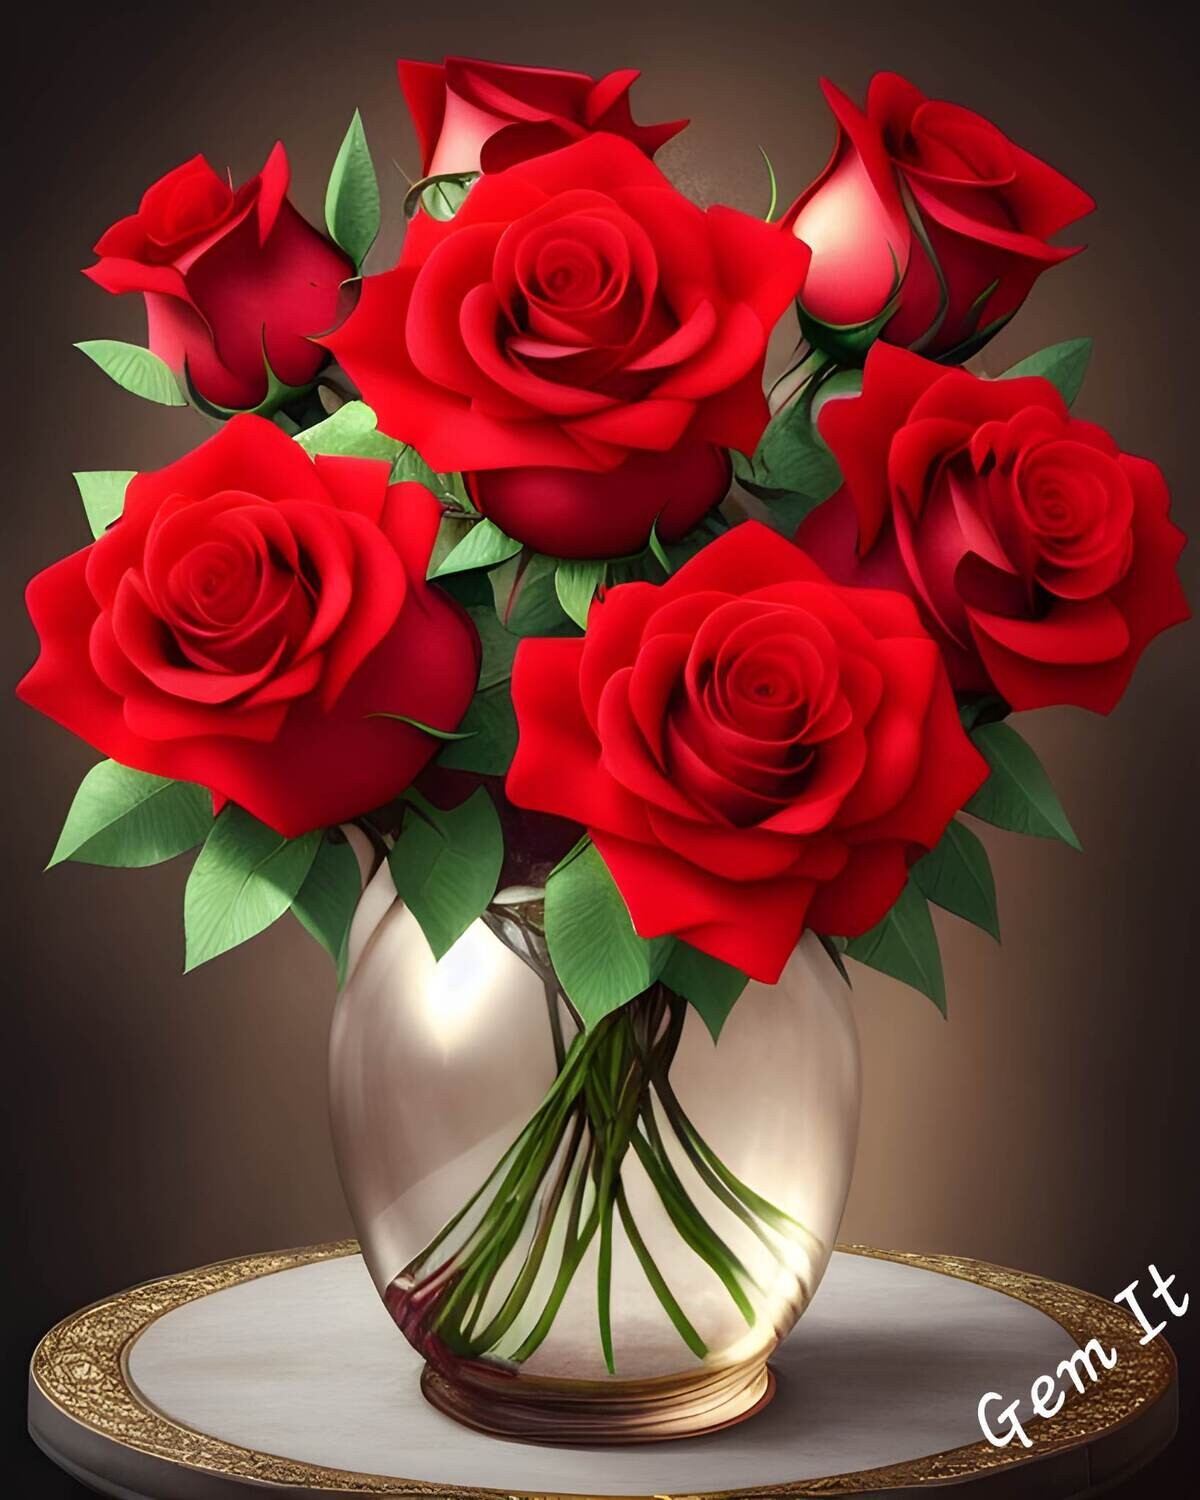 Roses Red 2 - Specially ordered for you. Delivery is approximately 4 - 6 weeks.